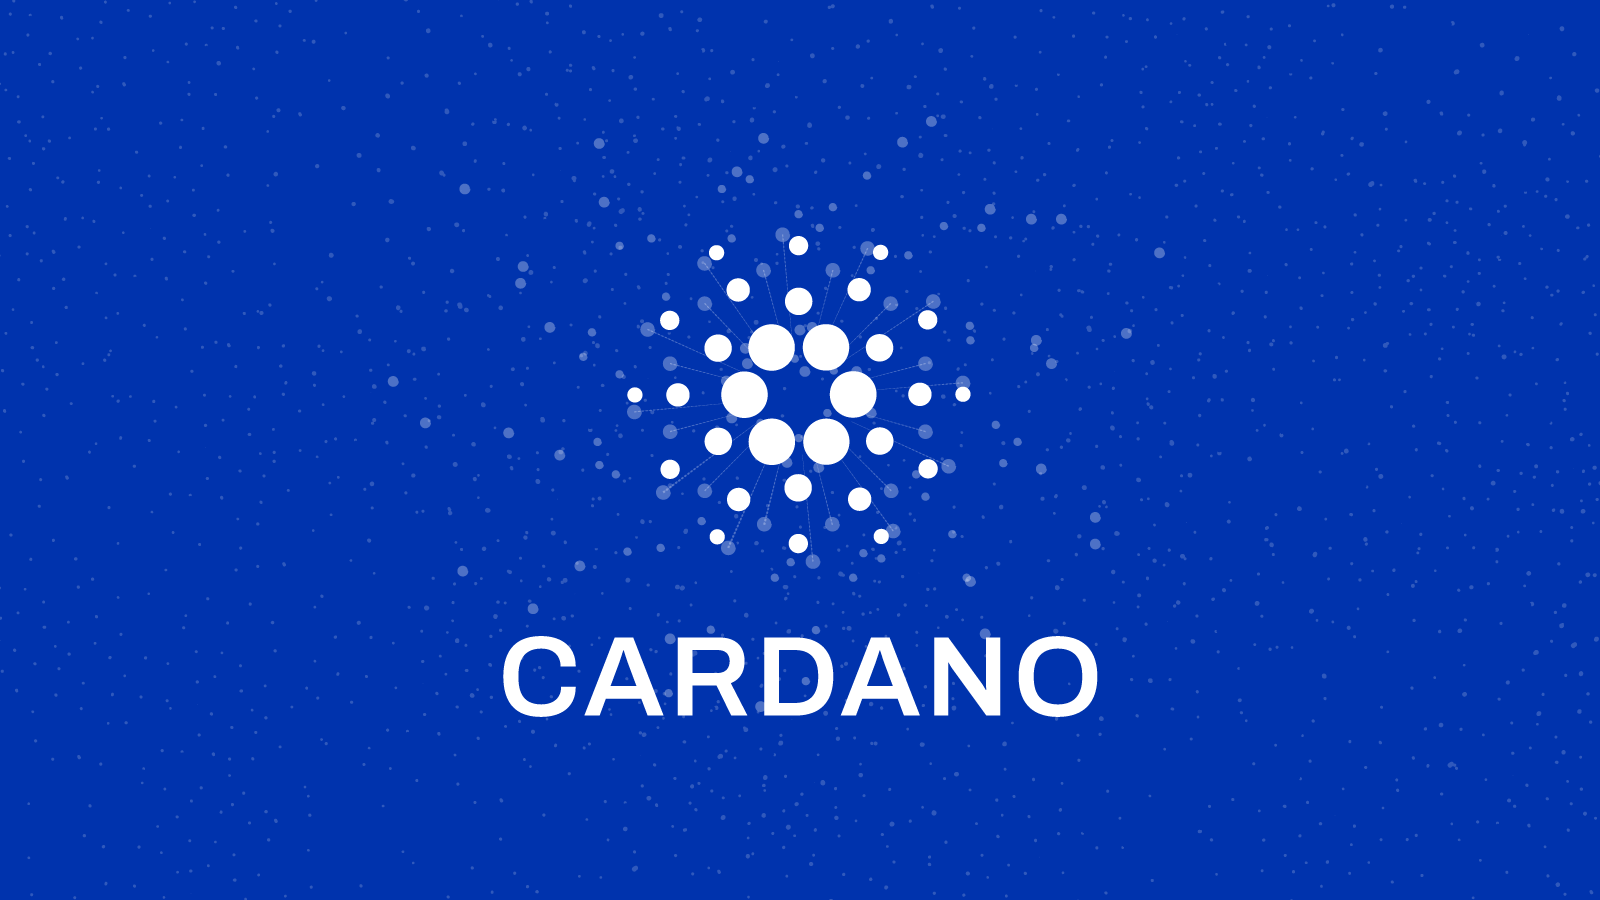 What exactly is Cardano?